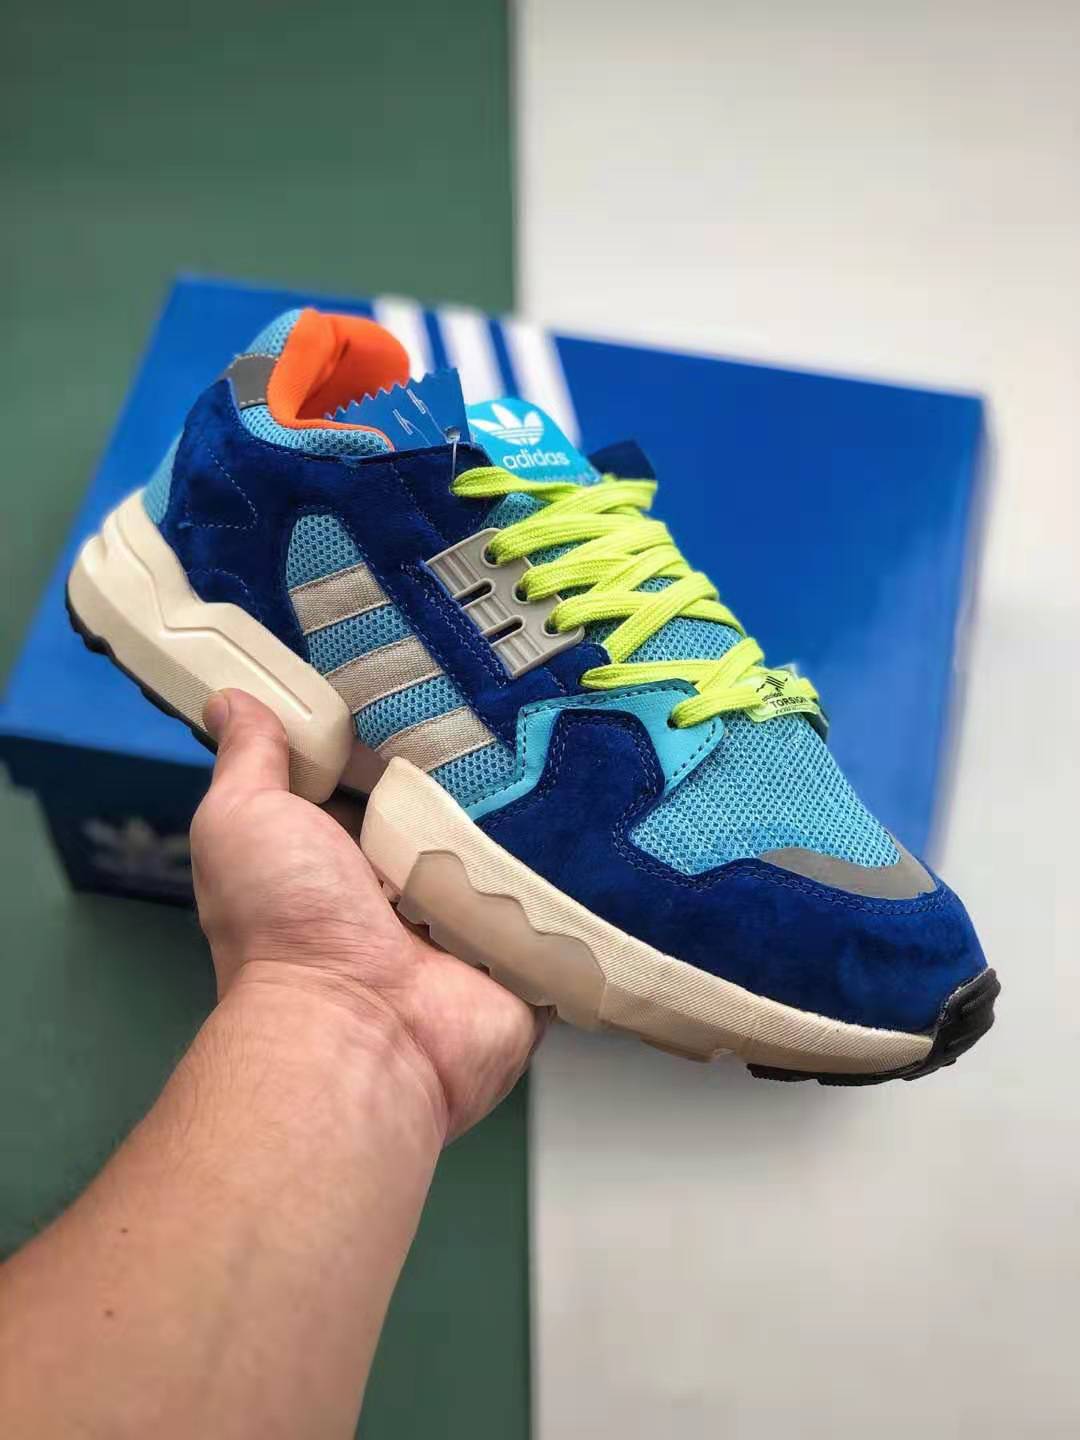 Adidas ZX Torsion Bright Cyan EE4787 - Shop the Latest Style